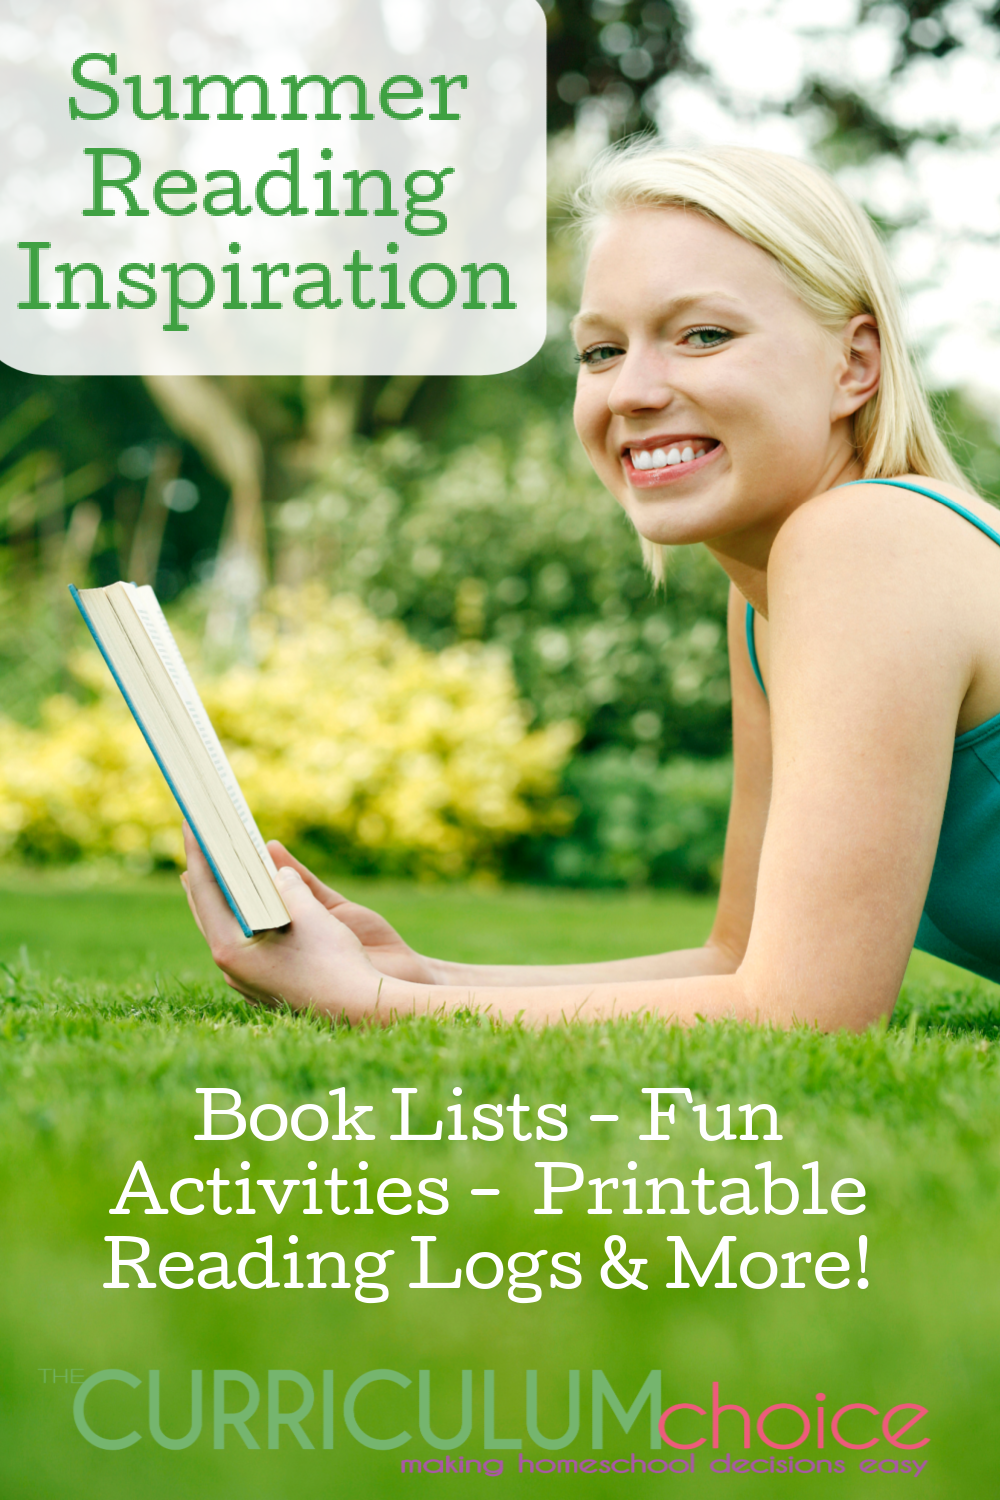 This collection of Summer Reading Inspiration includes everything from book lists, to book clubs, book related activities and more! A collection of resources from The Curriculum Choice.